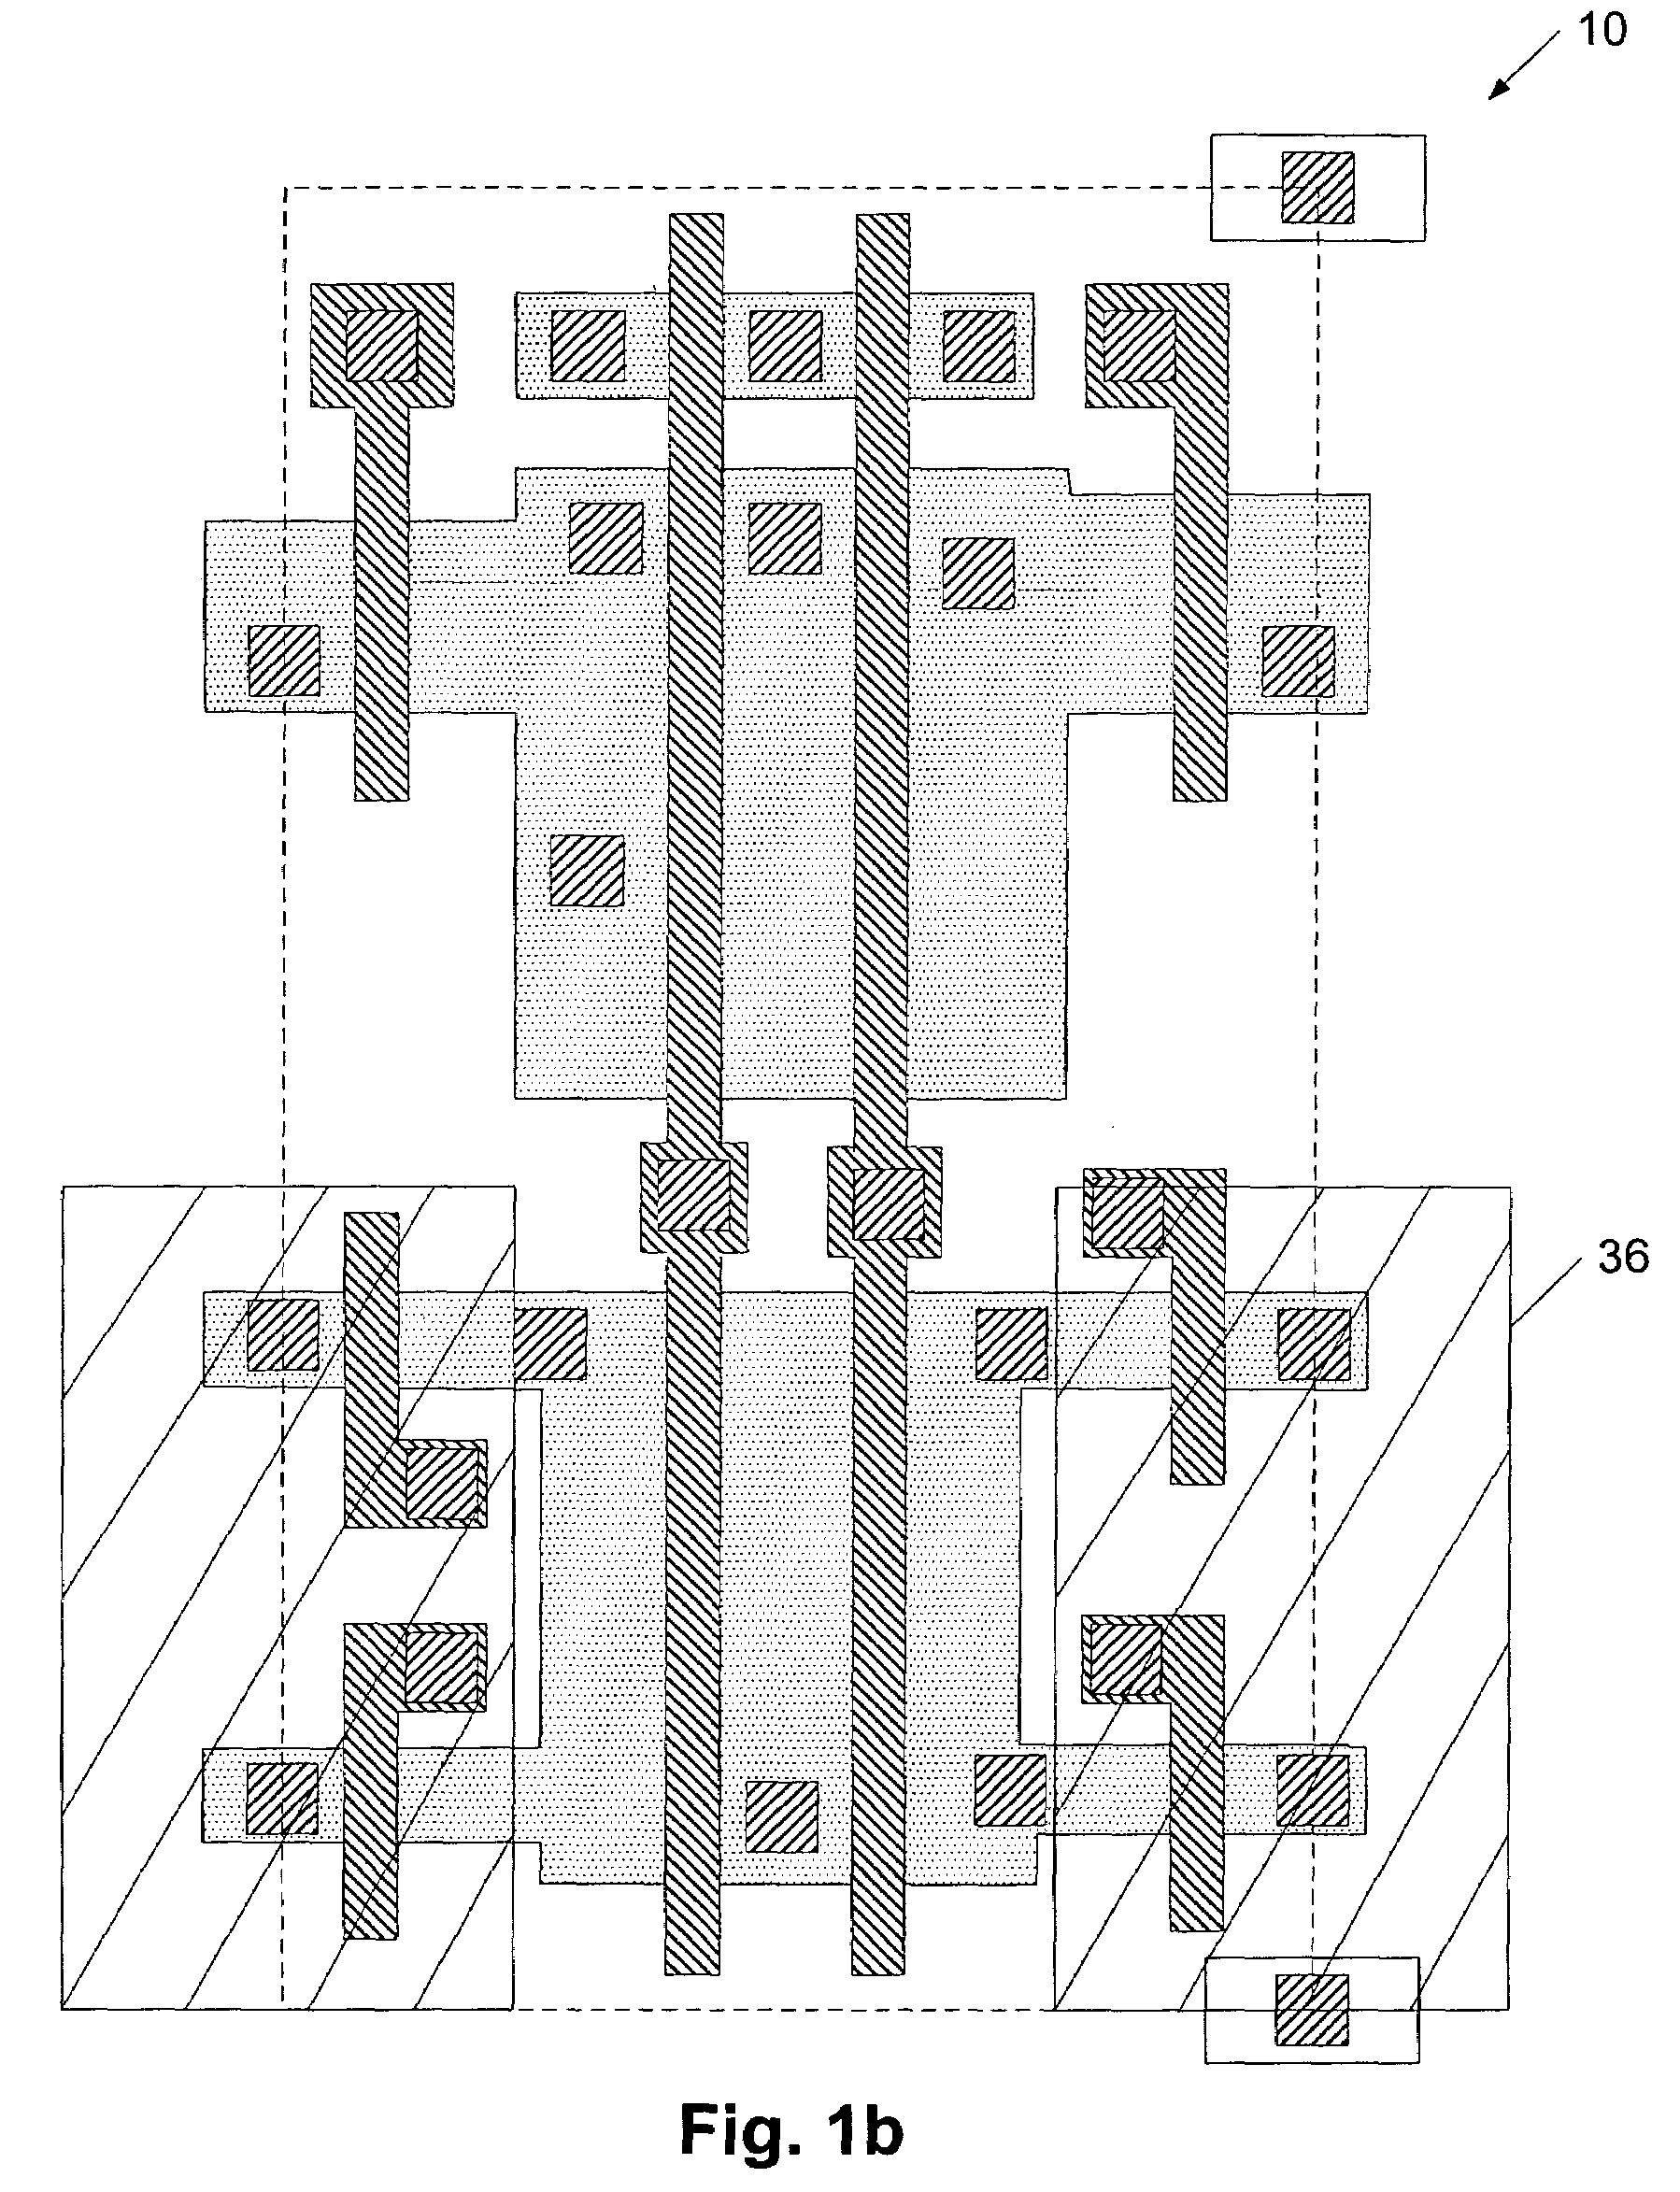 Basic cell architecture for structured application-specific integrated circuits